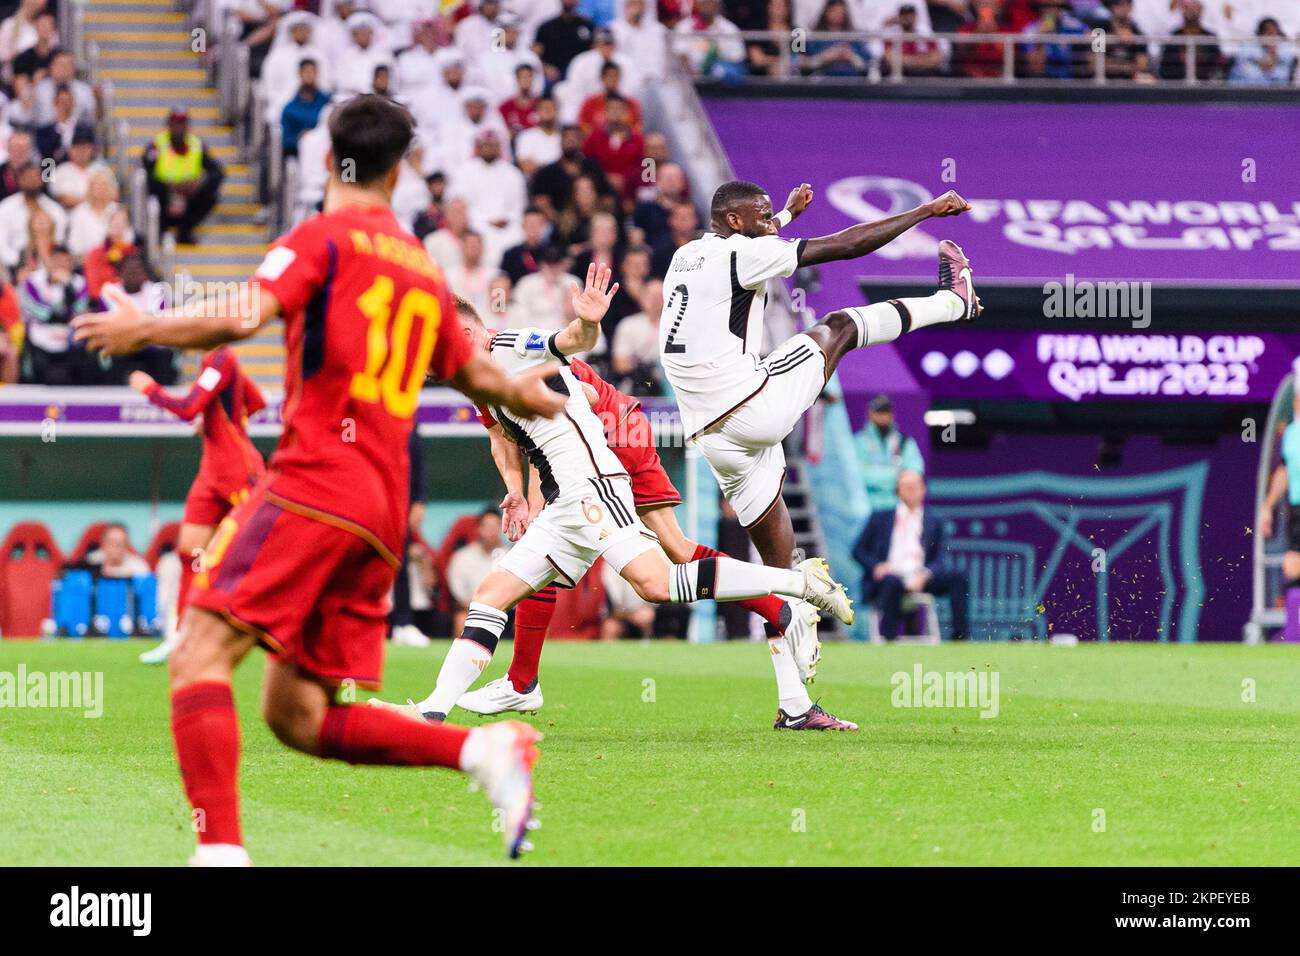 Al Bayt Stadium Antonio Ruediger of Germany during a match between Spain and Germany, valid for the group stage of the World Cup, held at Al Bayt Stadium in Al-Khor, Qatar. (Marcio Machado/SPP) Stock Photo